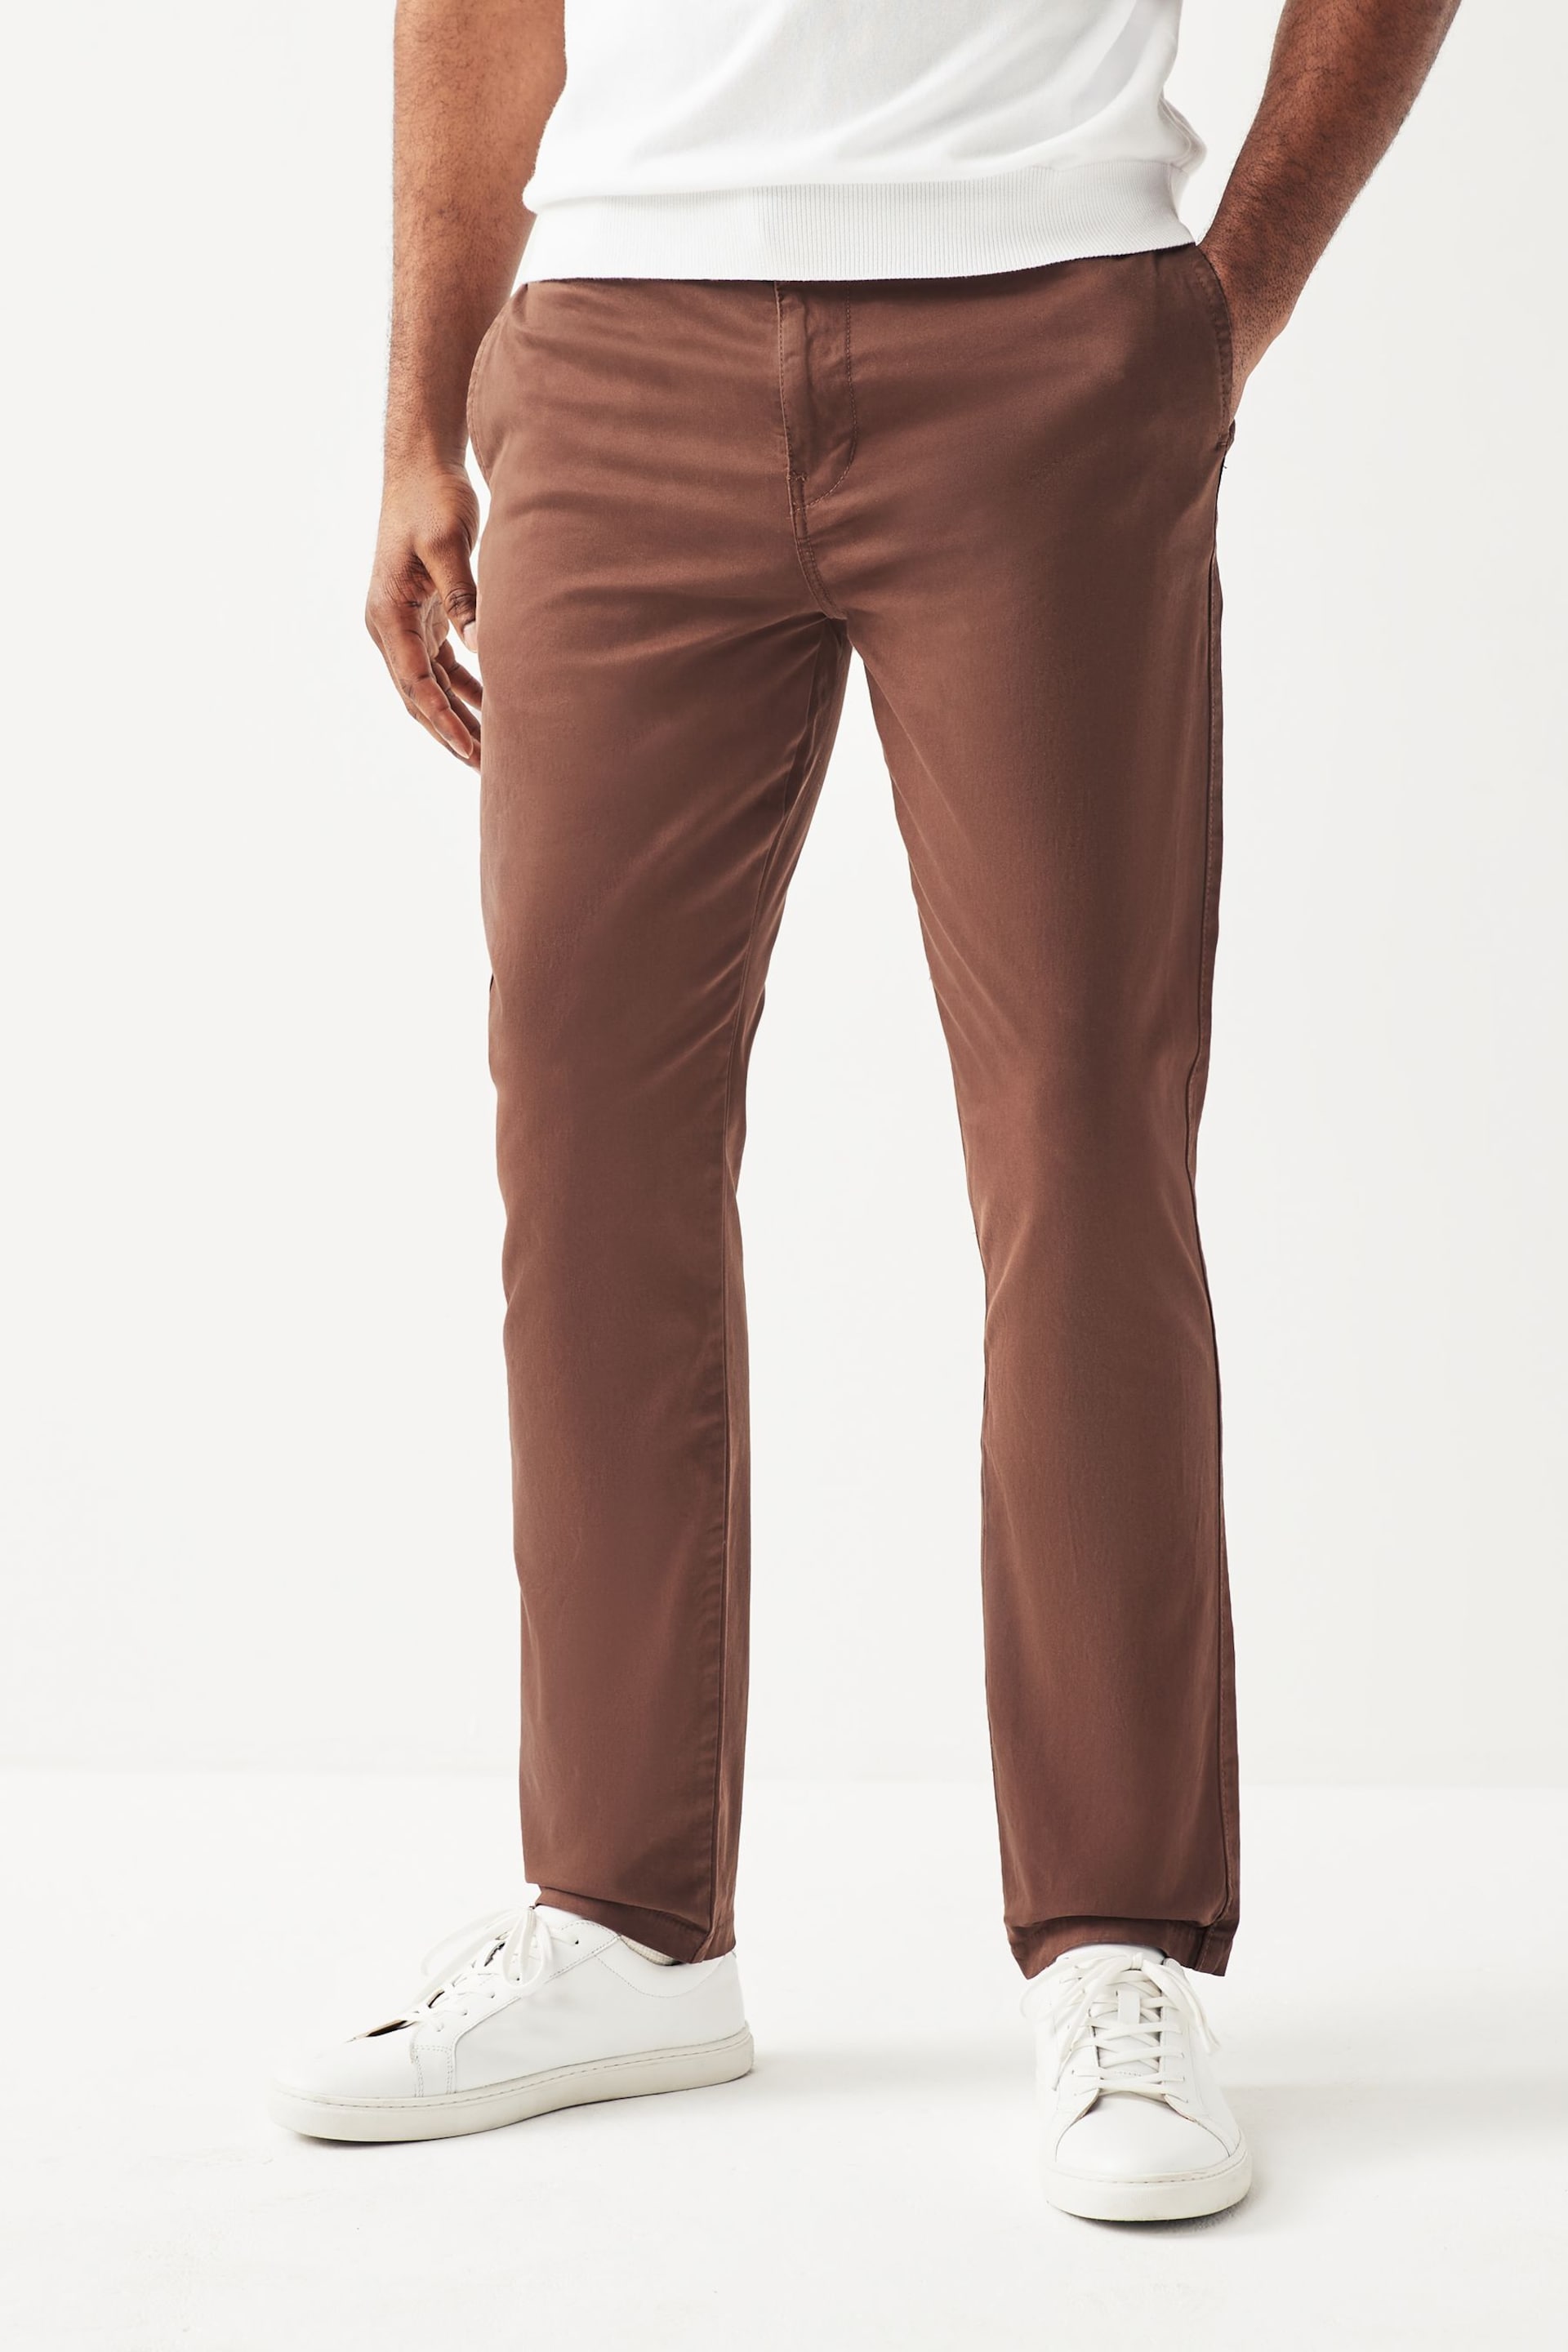 Rust Brown Slim Fit Premium Laundered Stretch Chinos Trousers - Image 1 of 7